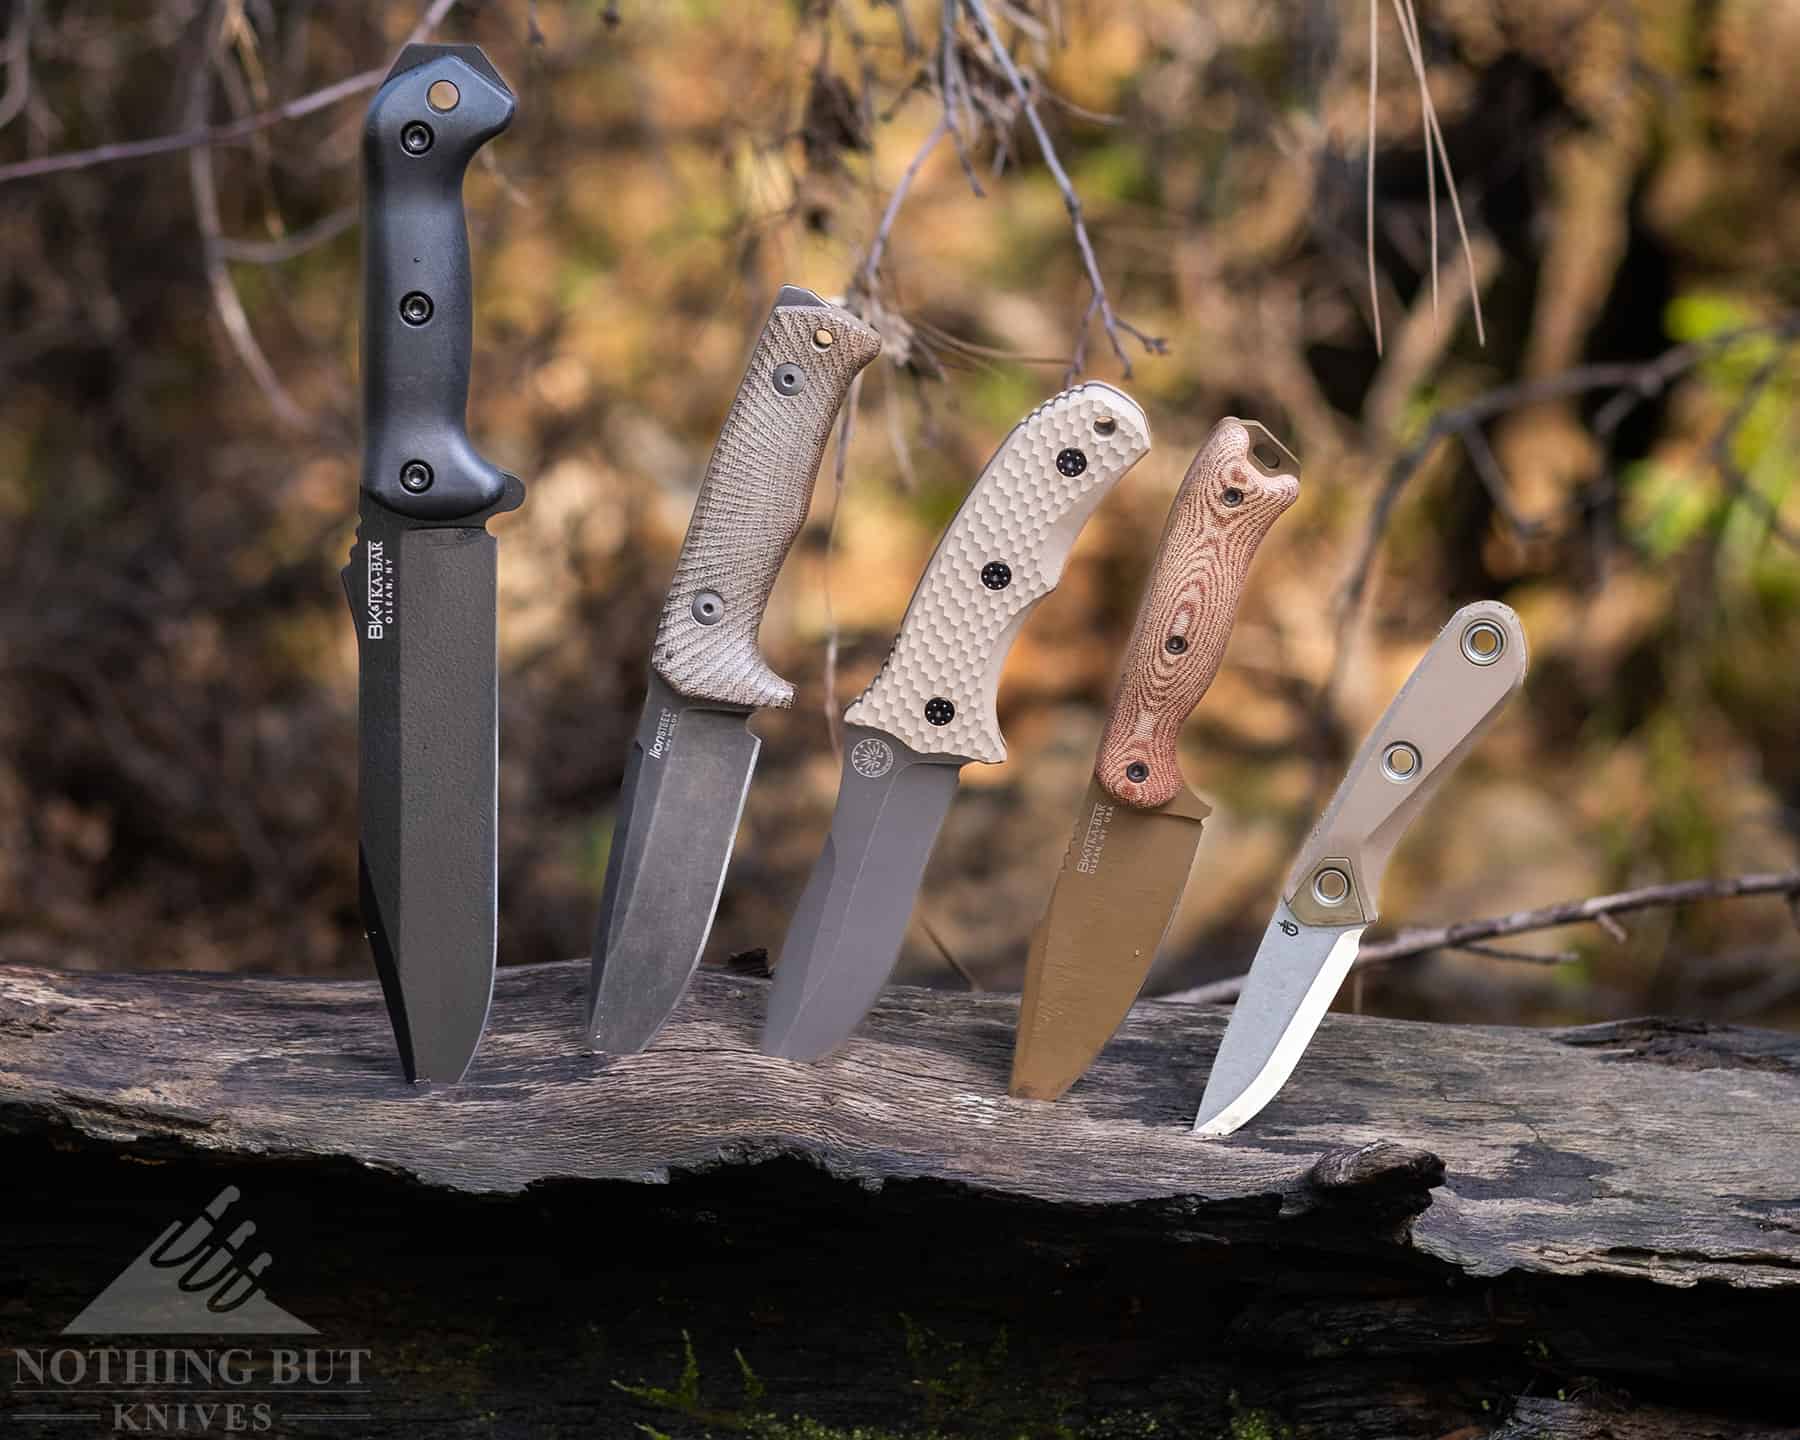 The Best Survival Knives in 2023 - Tested and Reviewed